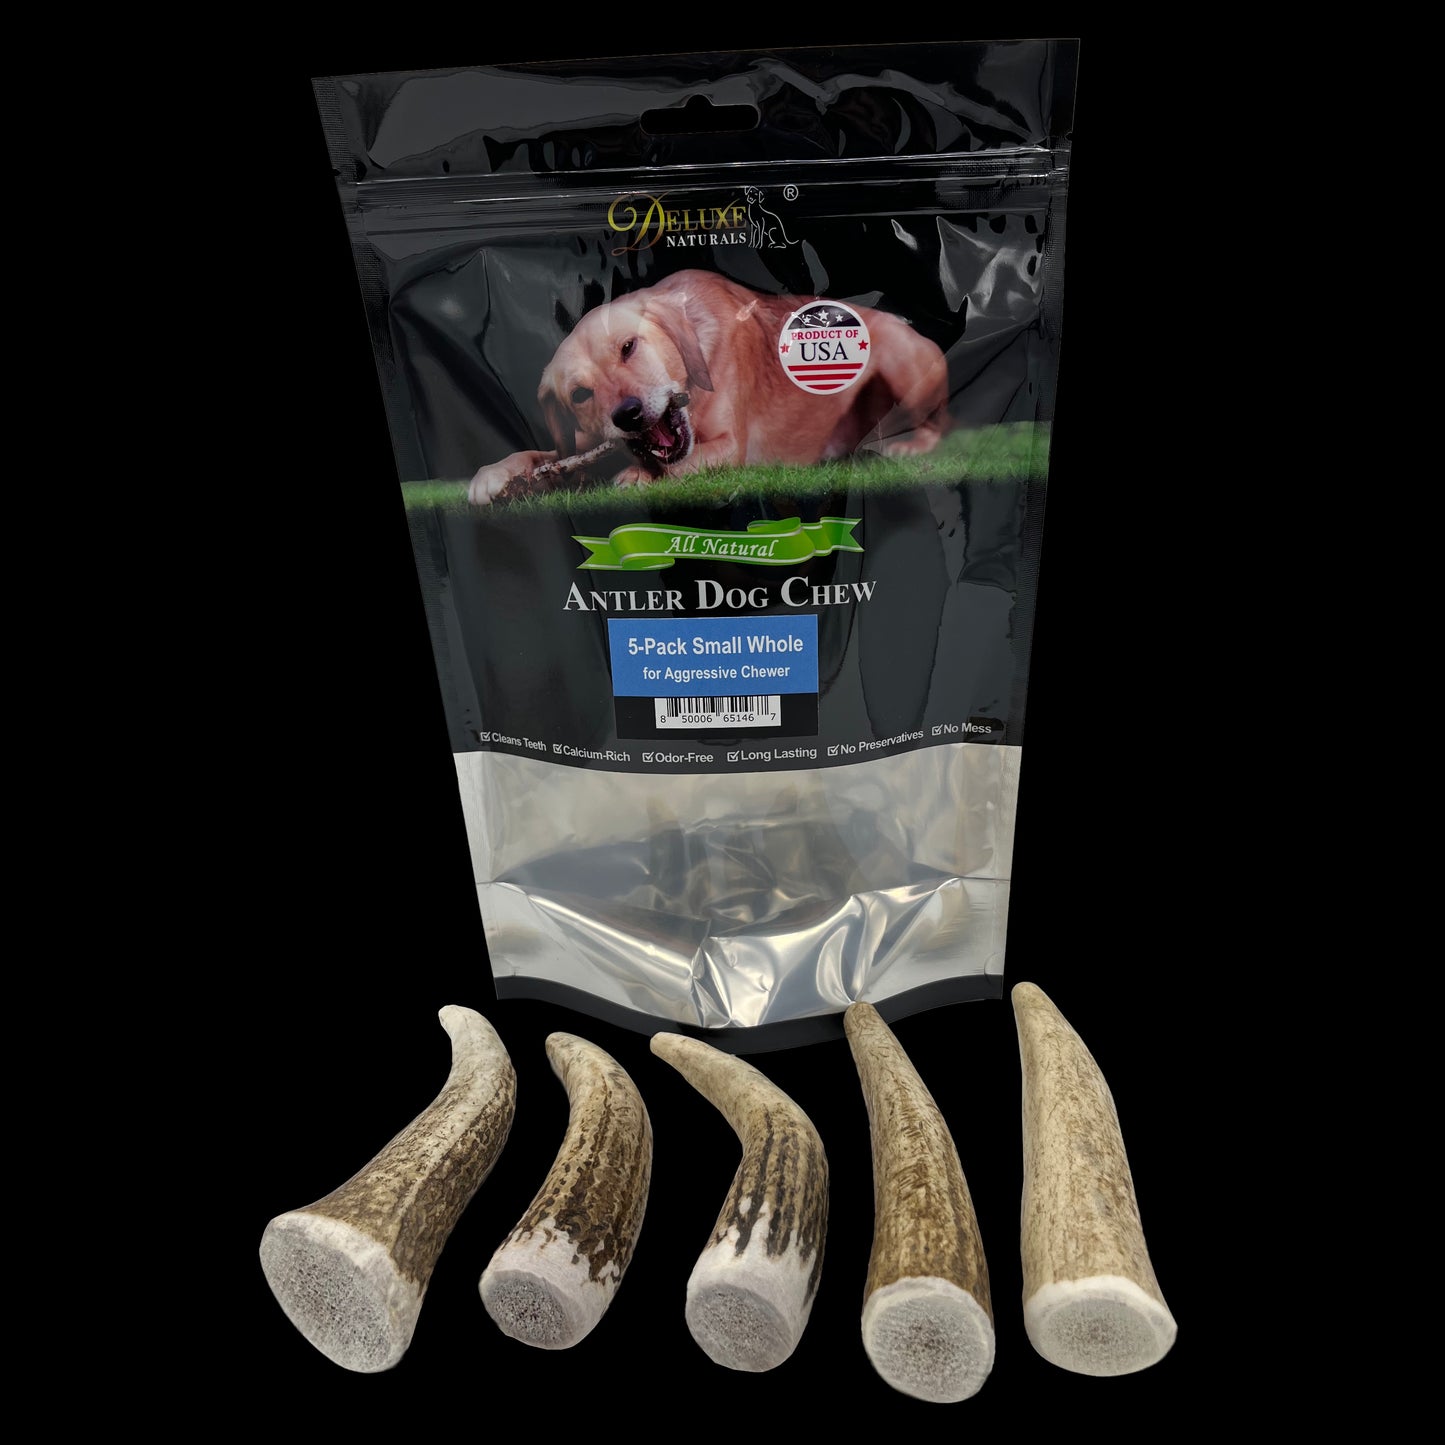 Deluxe Naturals 5-Pack Elk Antler Dog Chew - Small Whole